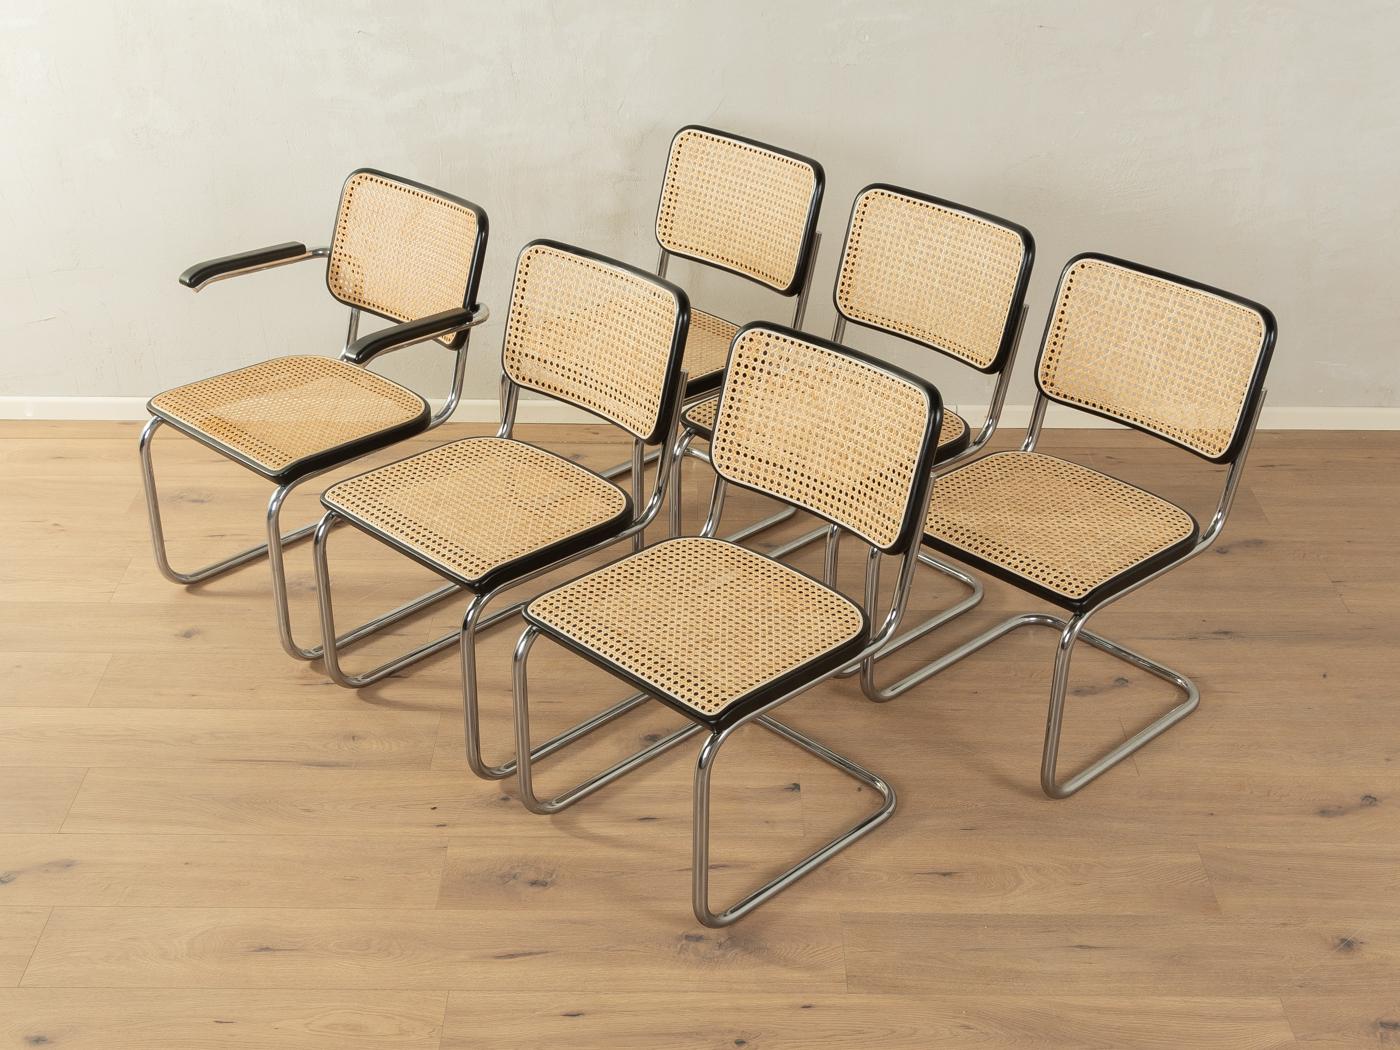 Legendary tubular steel chairs, model S 32 and S 64, designed by Marcel Breuer for Thonet (1928). High-quality  frame made of chromed tubular steel. The seat and backrest of S 64 are covered with the original 